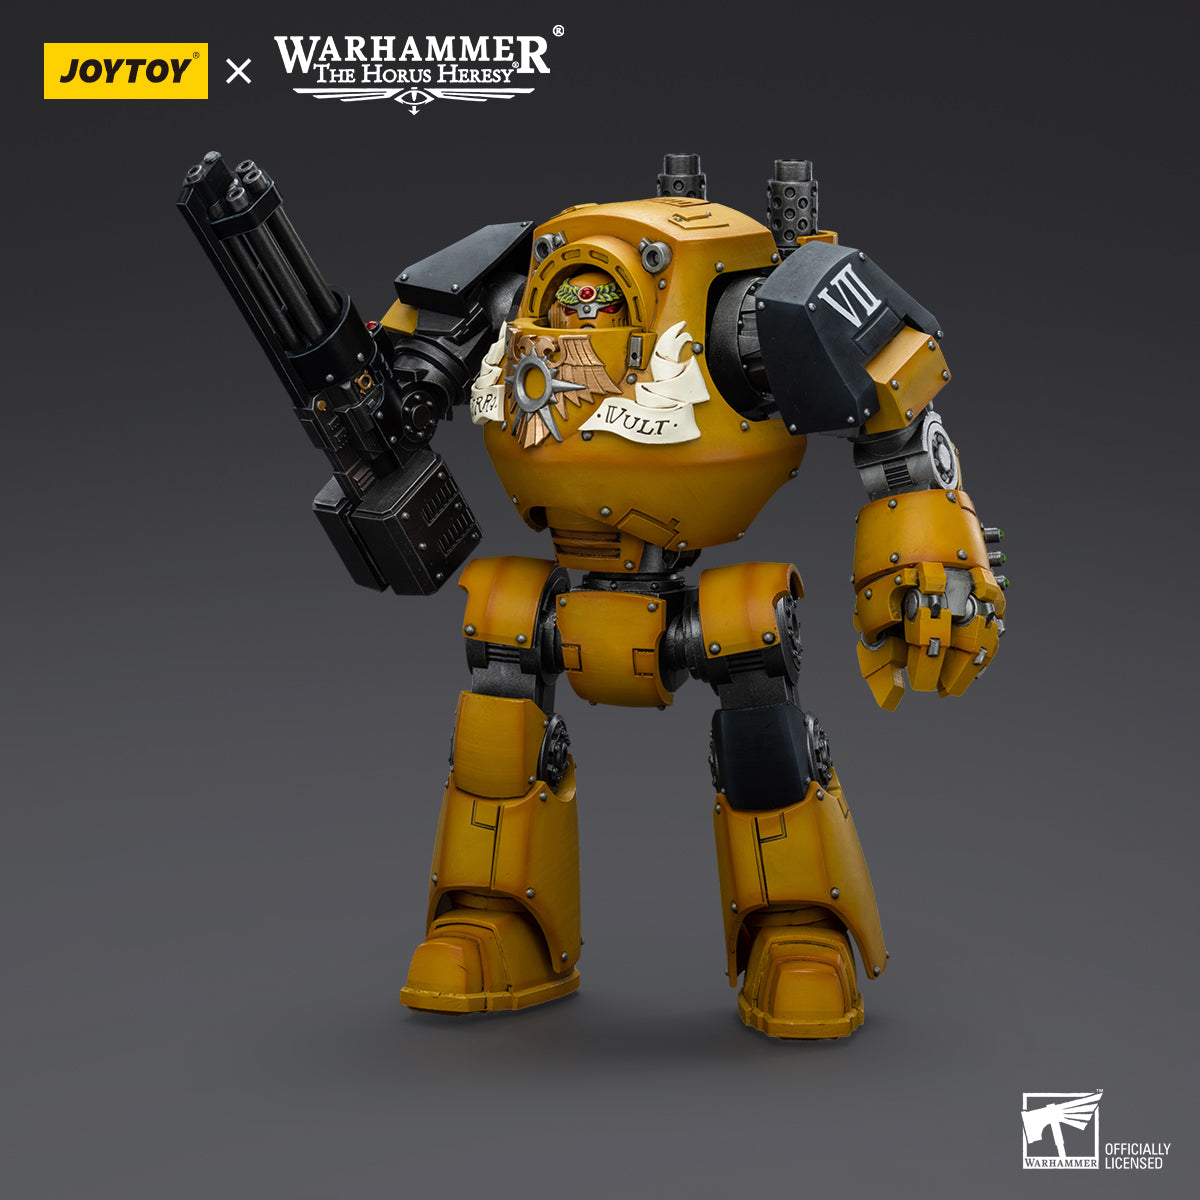 Warhammer Collectibles: 1/18 Imperial Fists Contemptor Dreadnought (Preorder)